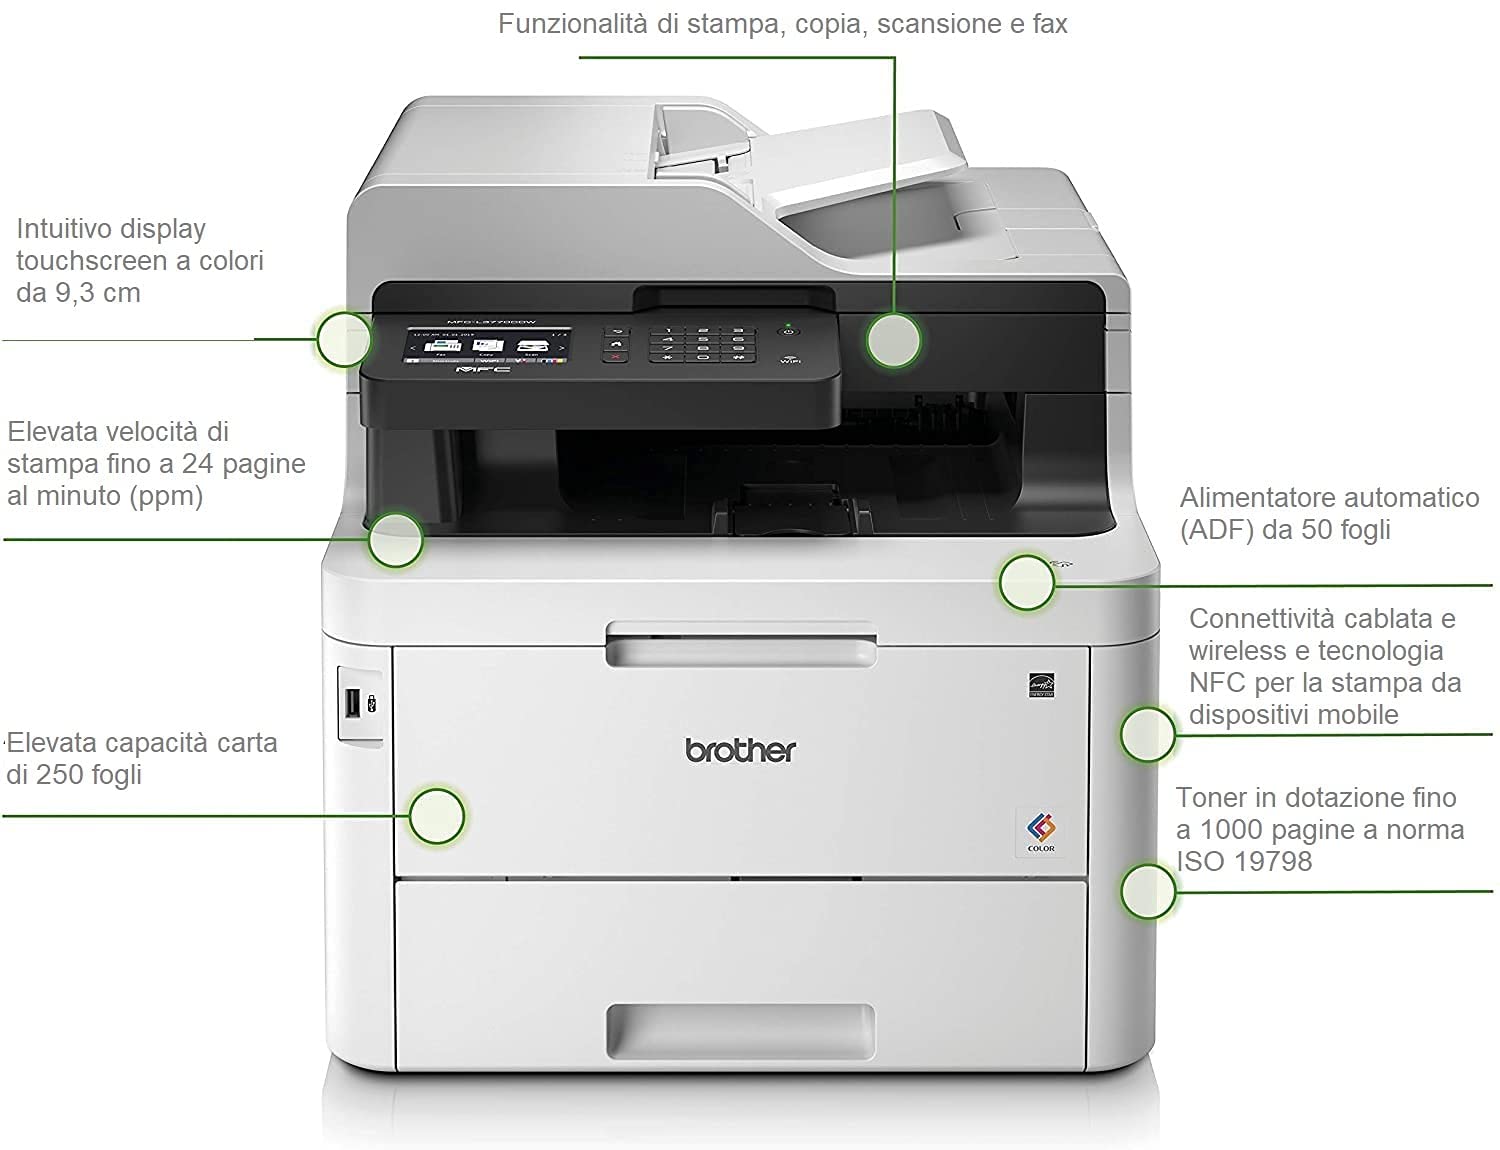 Brother MFC-L3770CDW A4 color LED multifunction printer with Wi-Fi, Dual CIS, Ethernet, NFC 24ppm ADF Automatic duplex